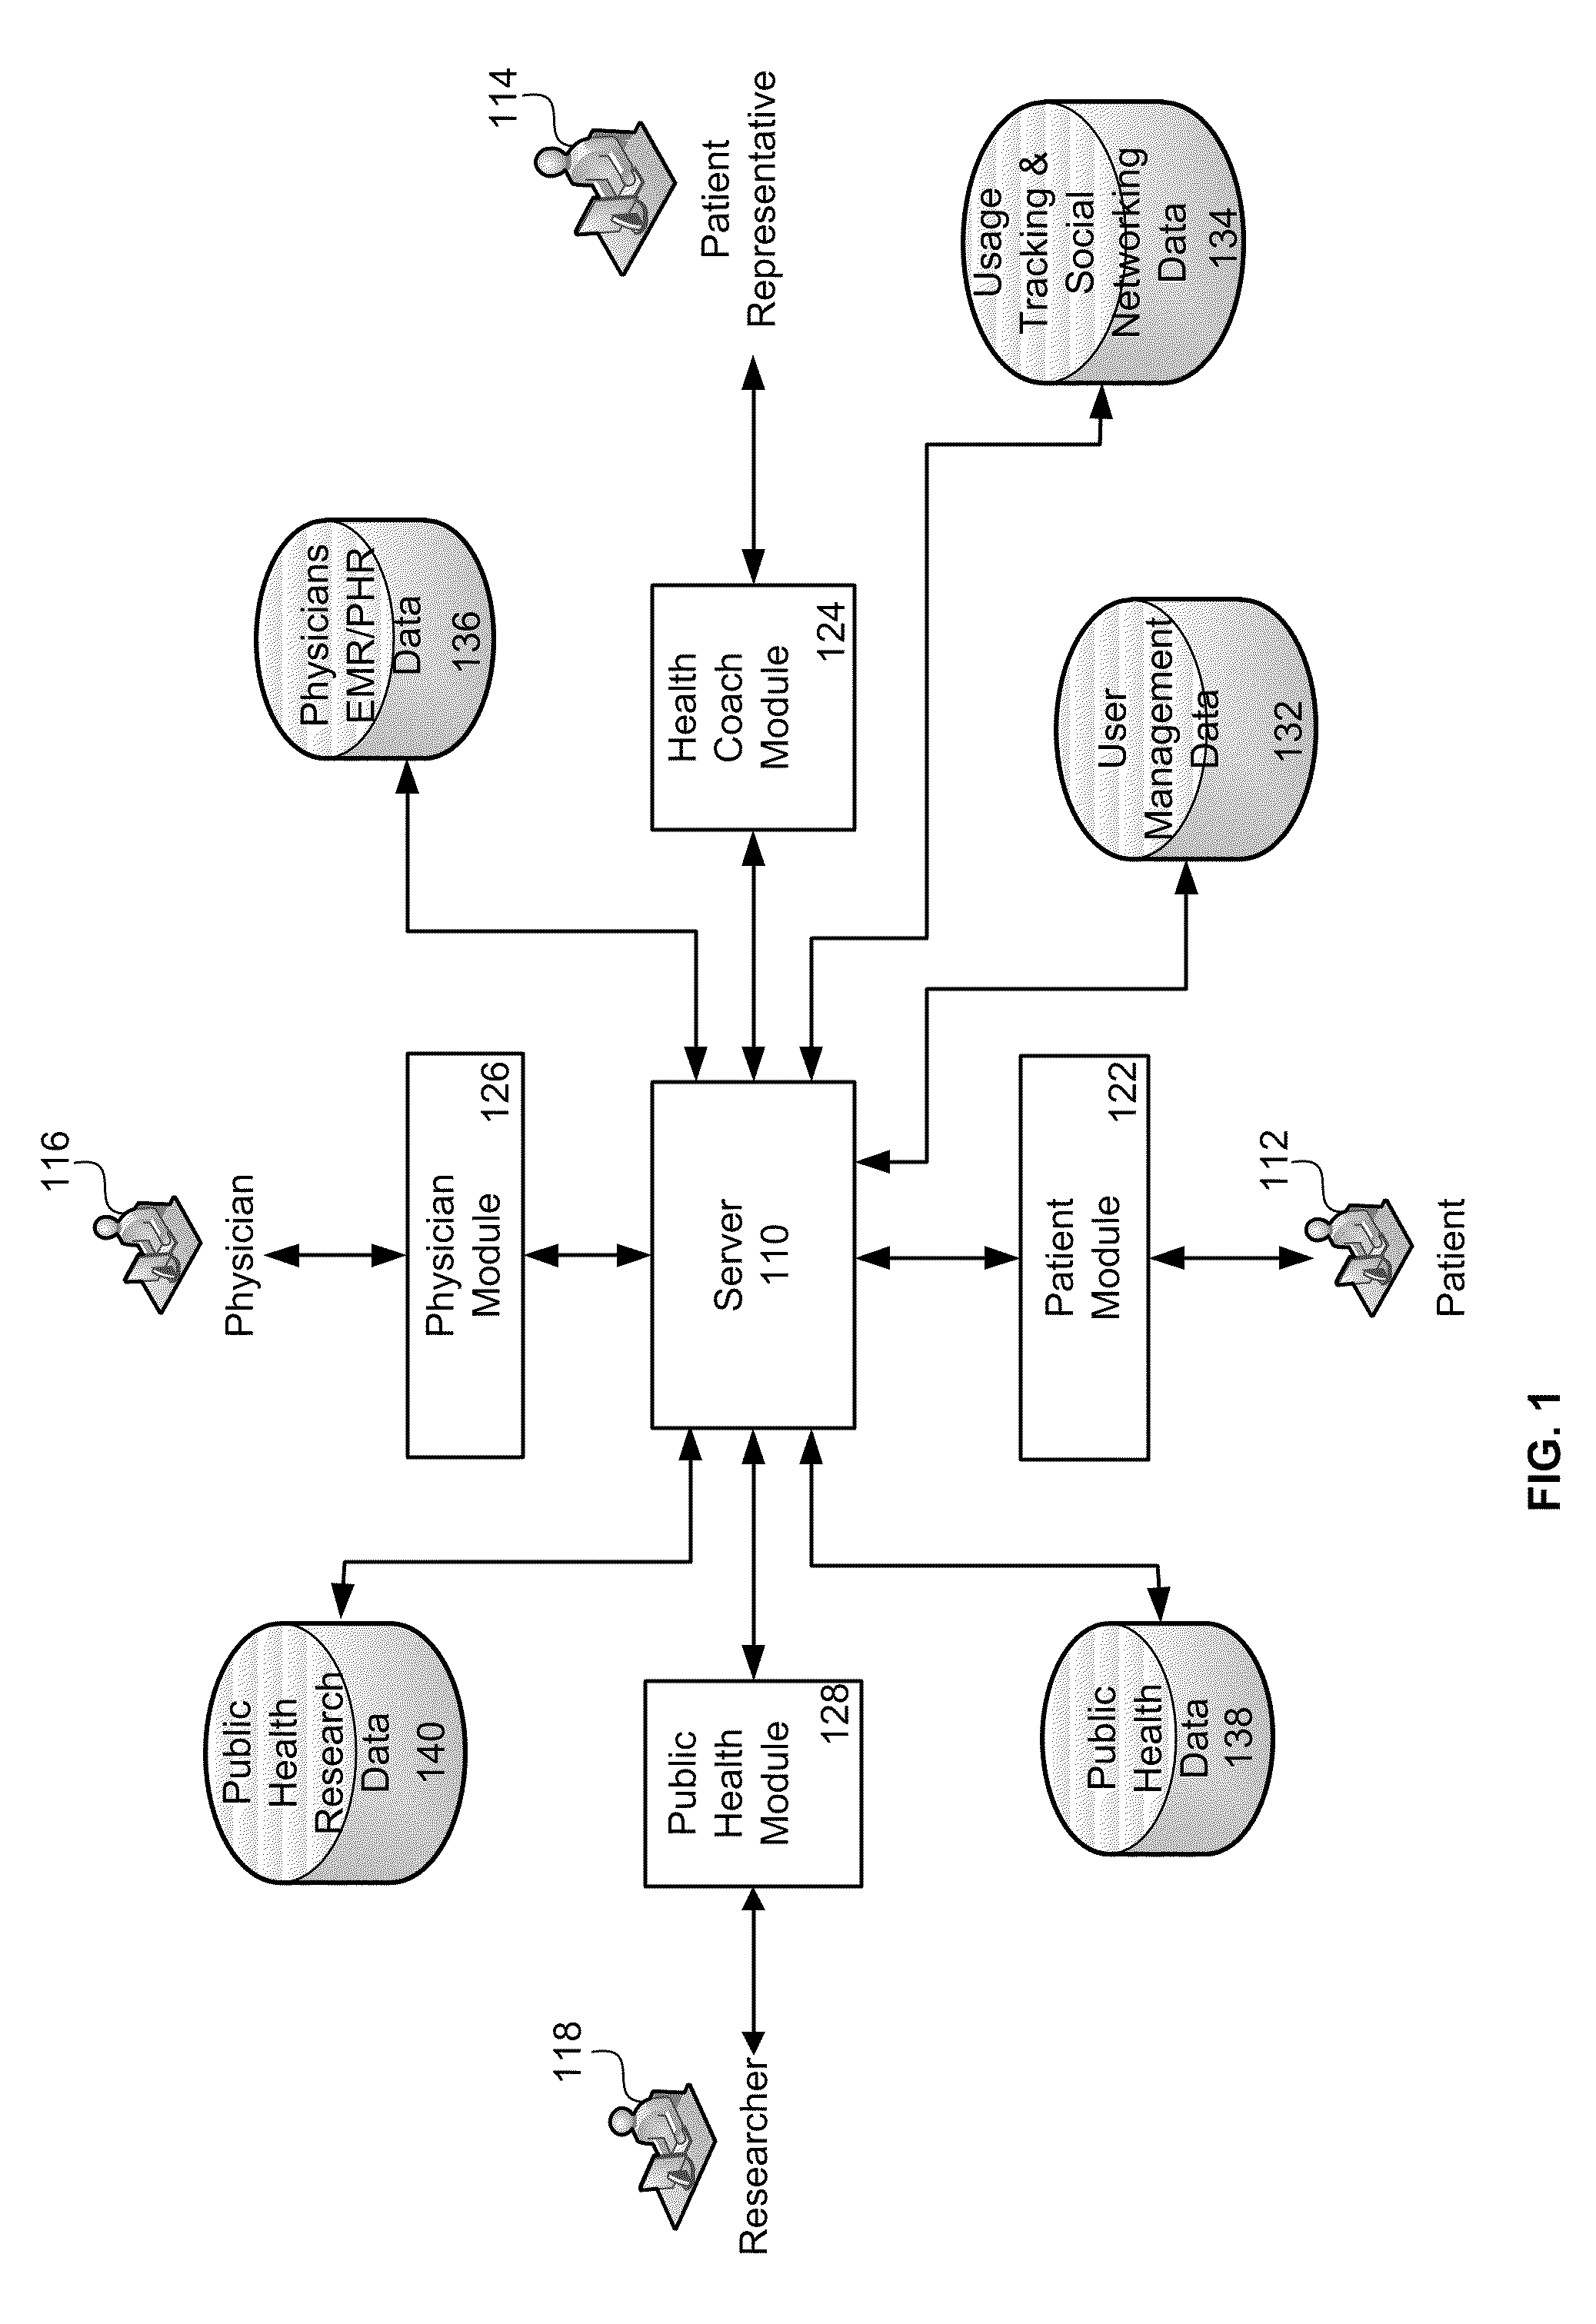 System and method for chronic illness care